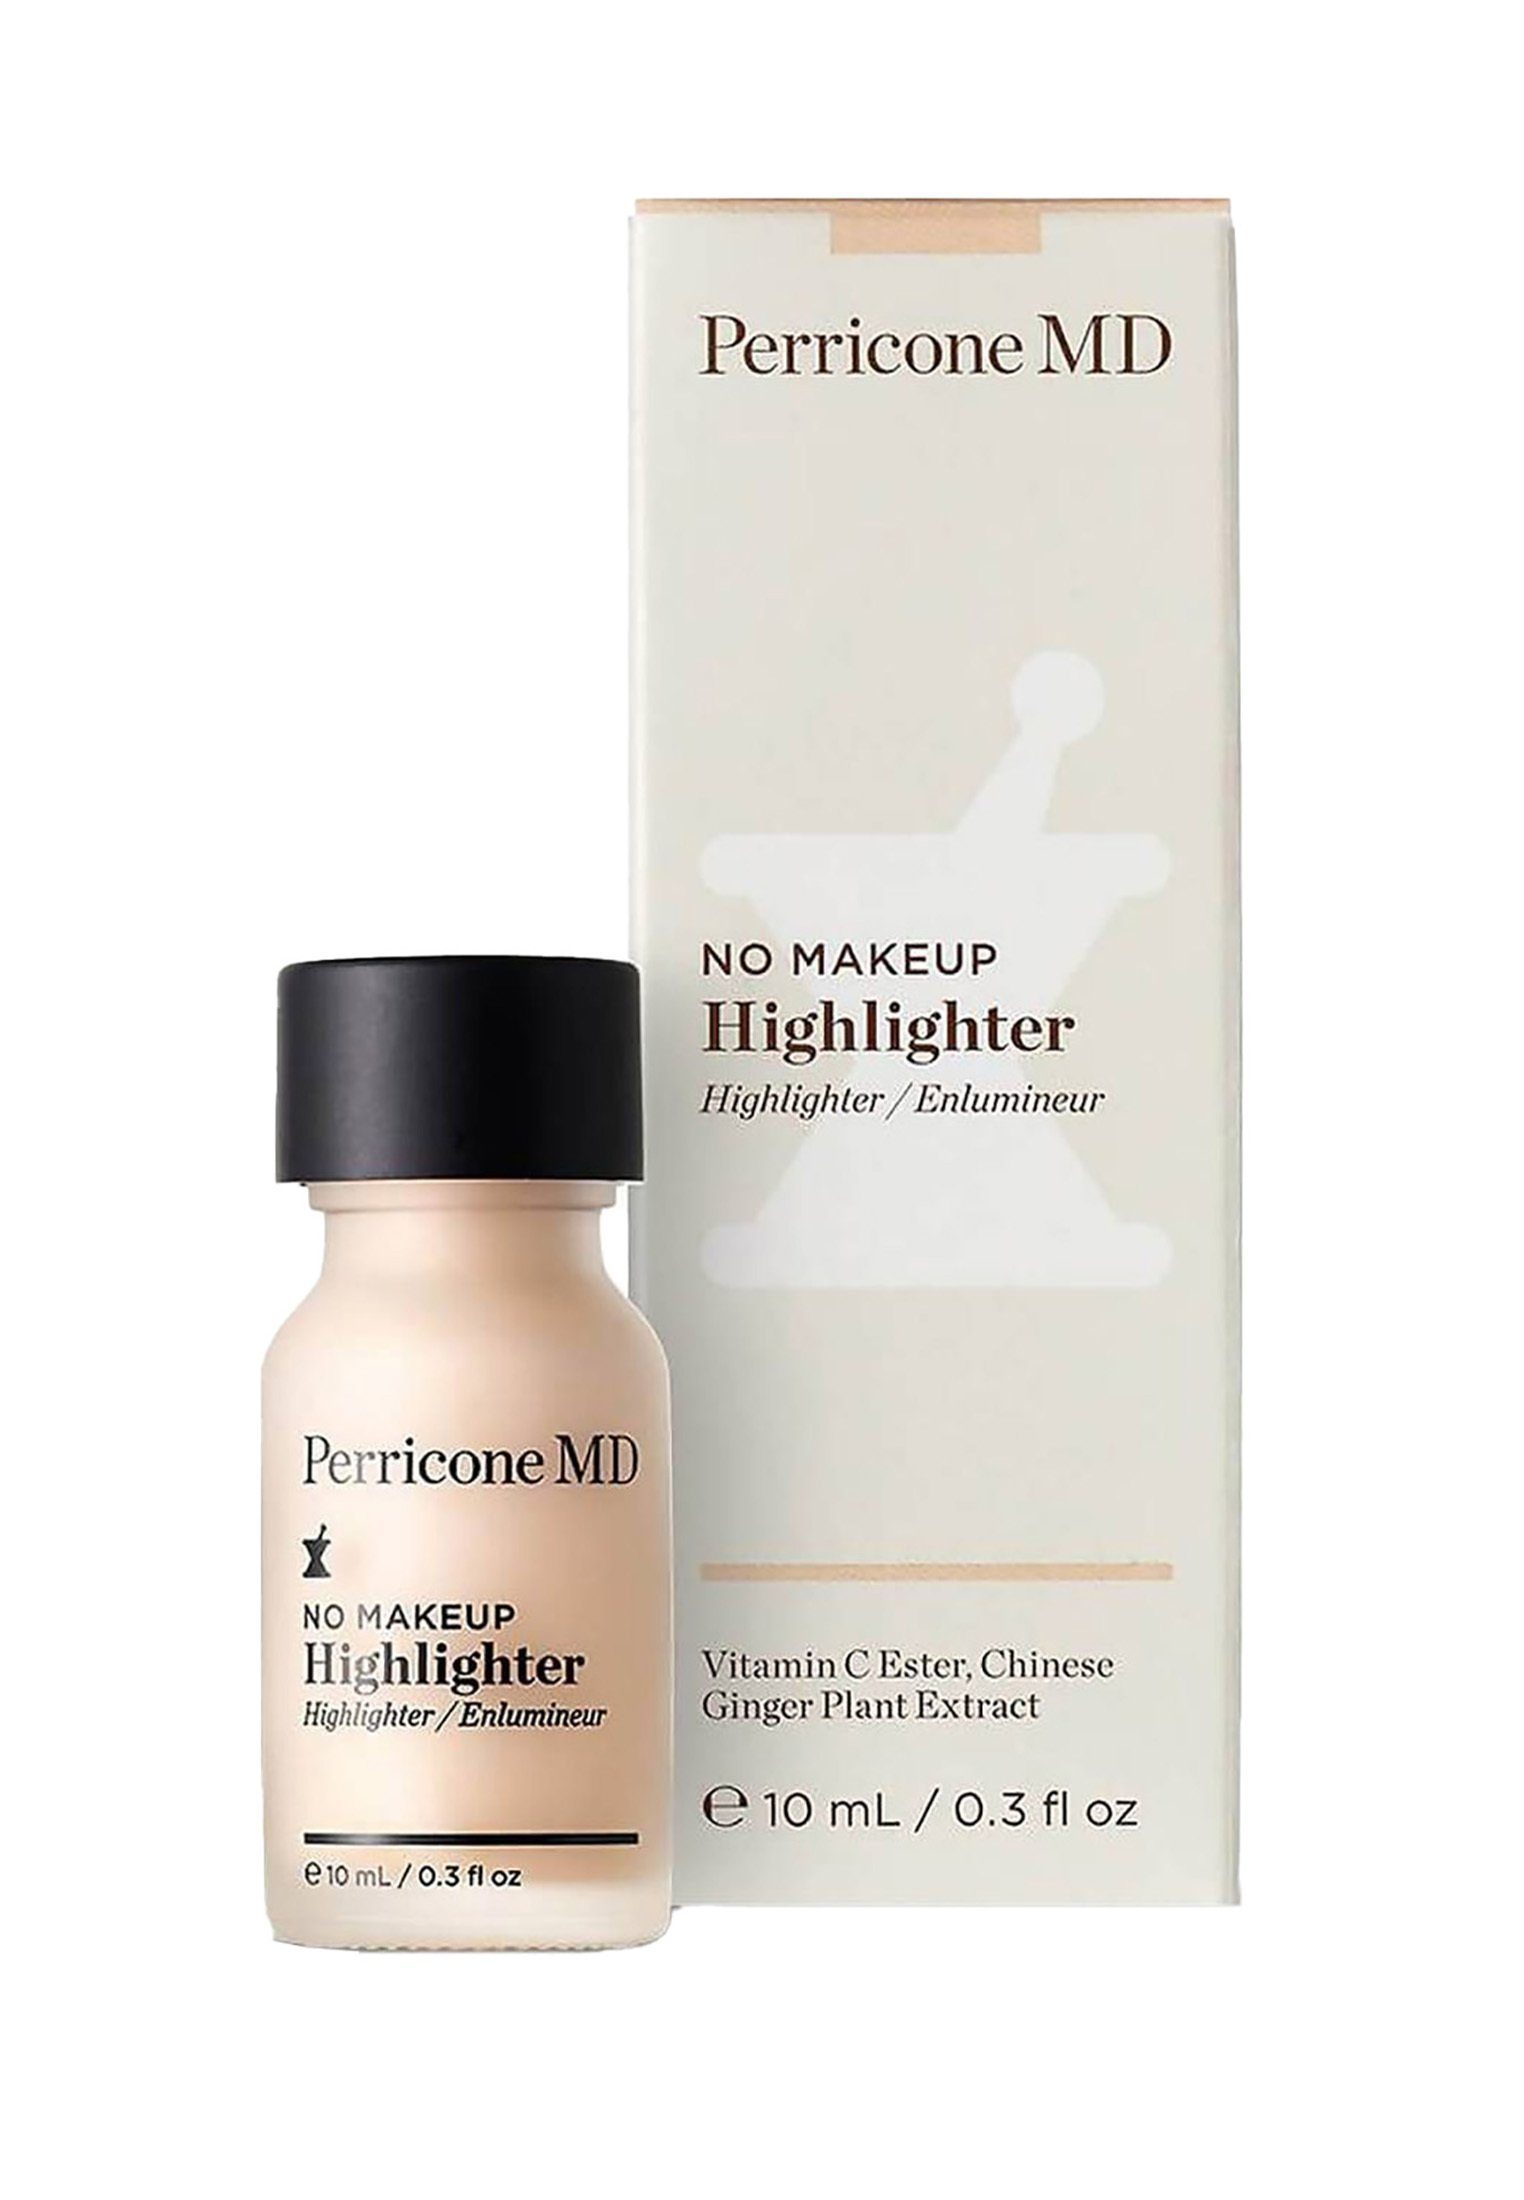 Makeup PERRICONE No Highlighter Highlighter PERRICONE Highlighter